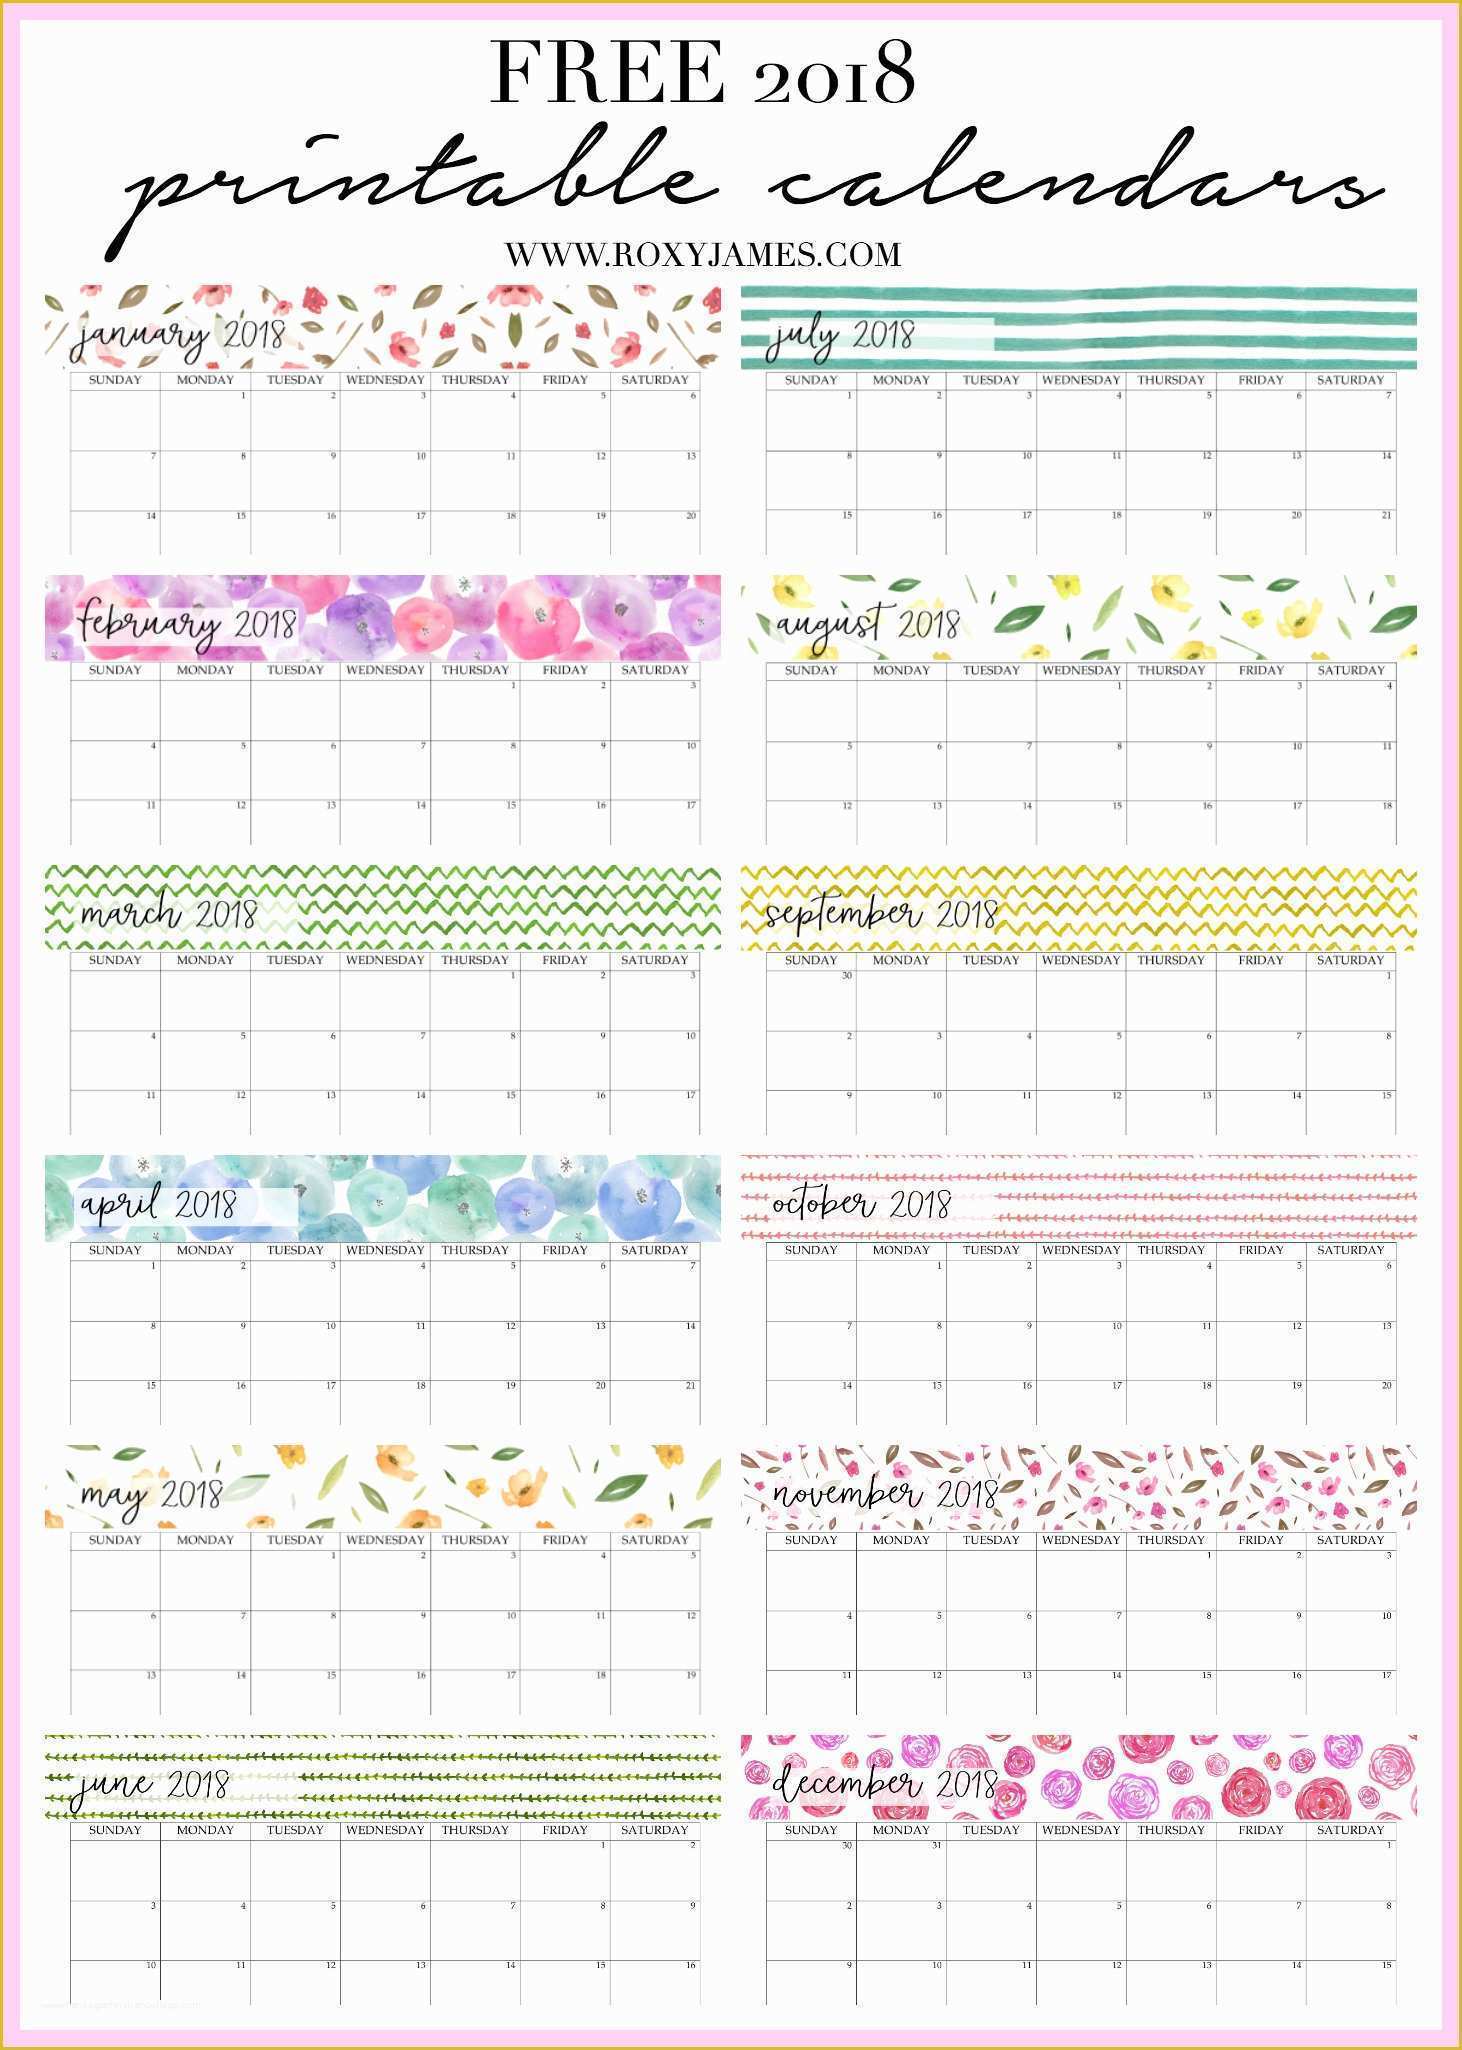 Indesign Planner Template 2018 Free Of Free 2018 Printable Calendars